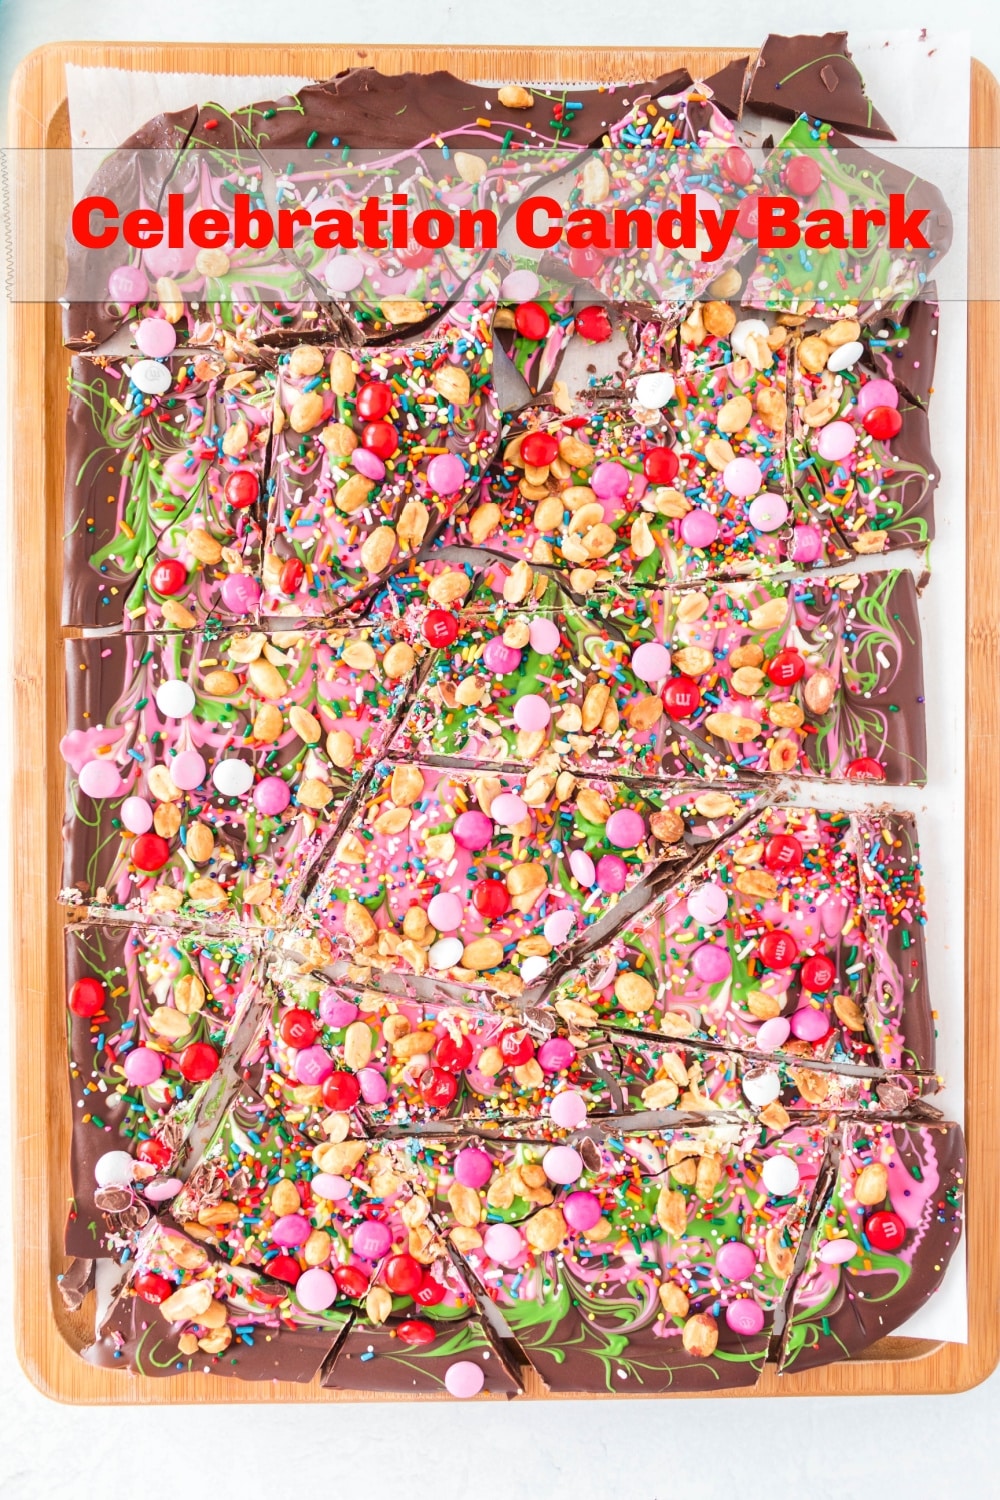 Festive, fun and bright, this celebration chocolate bark is here to deliciously sweeten any occasion - from special birthdays, holidays, baby and bridal showers or any occasion where chocolate is a must! This dark chocolate candy bark is also a great addition to any candy buffet or dessert table you might be setting up. via @cmpollak1